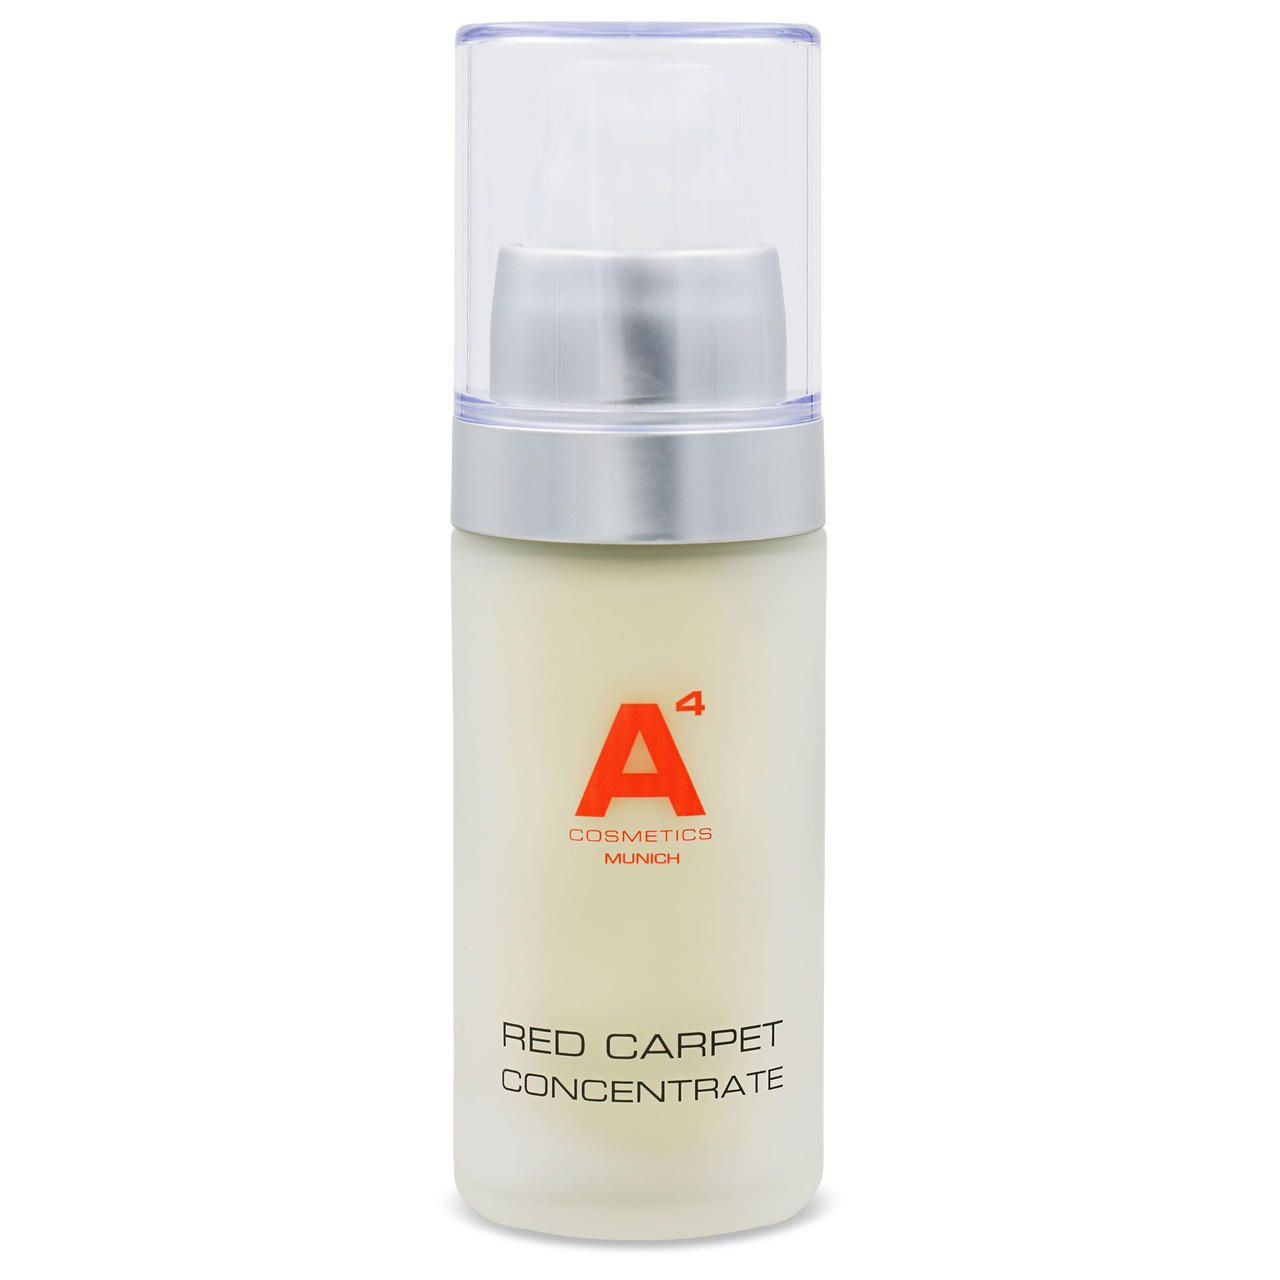 A4 Cosmetics, Red Carpet Concentrate